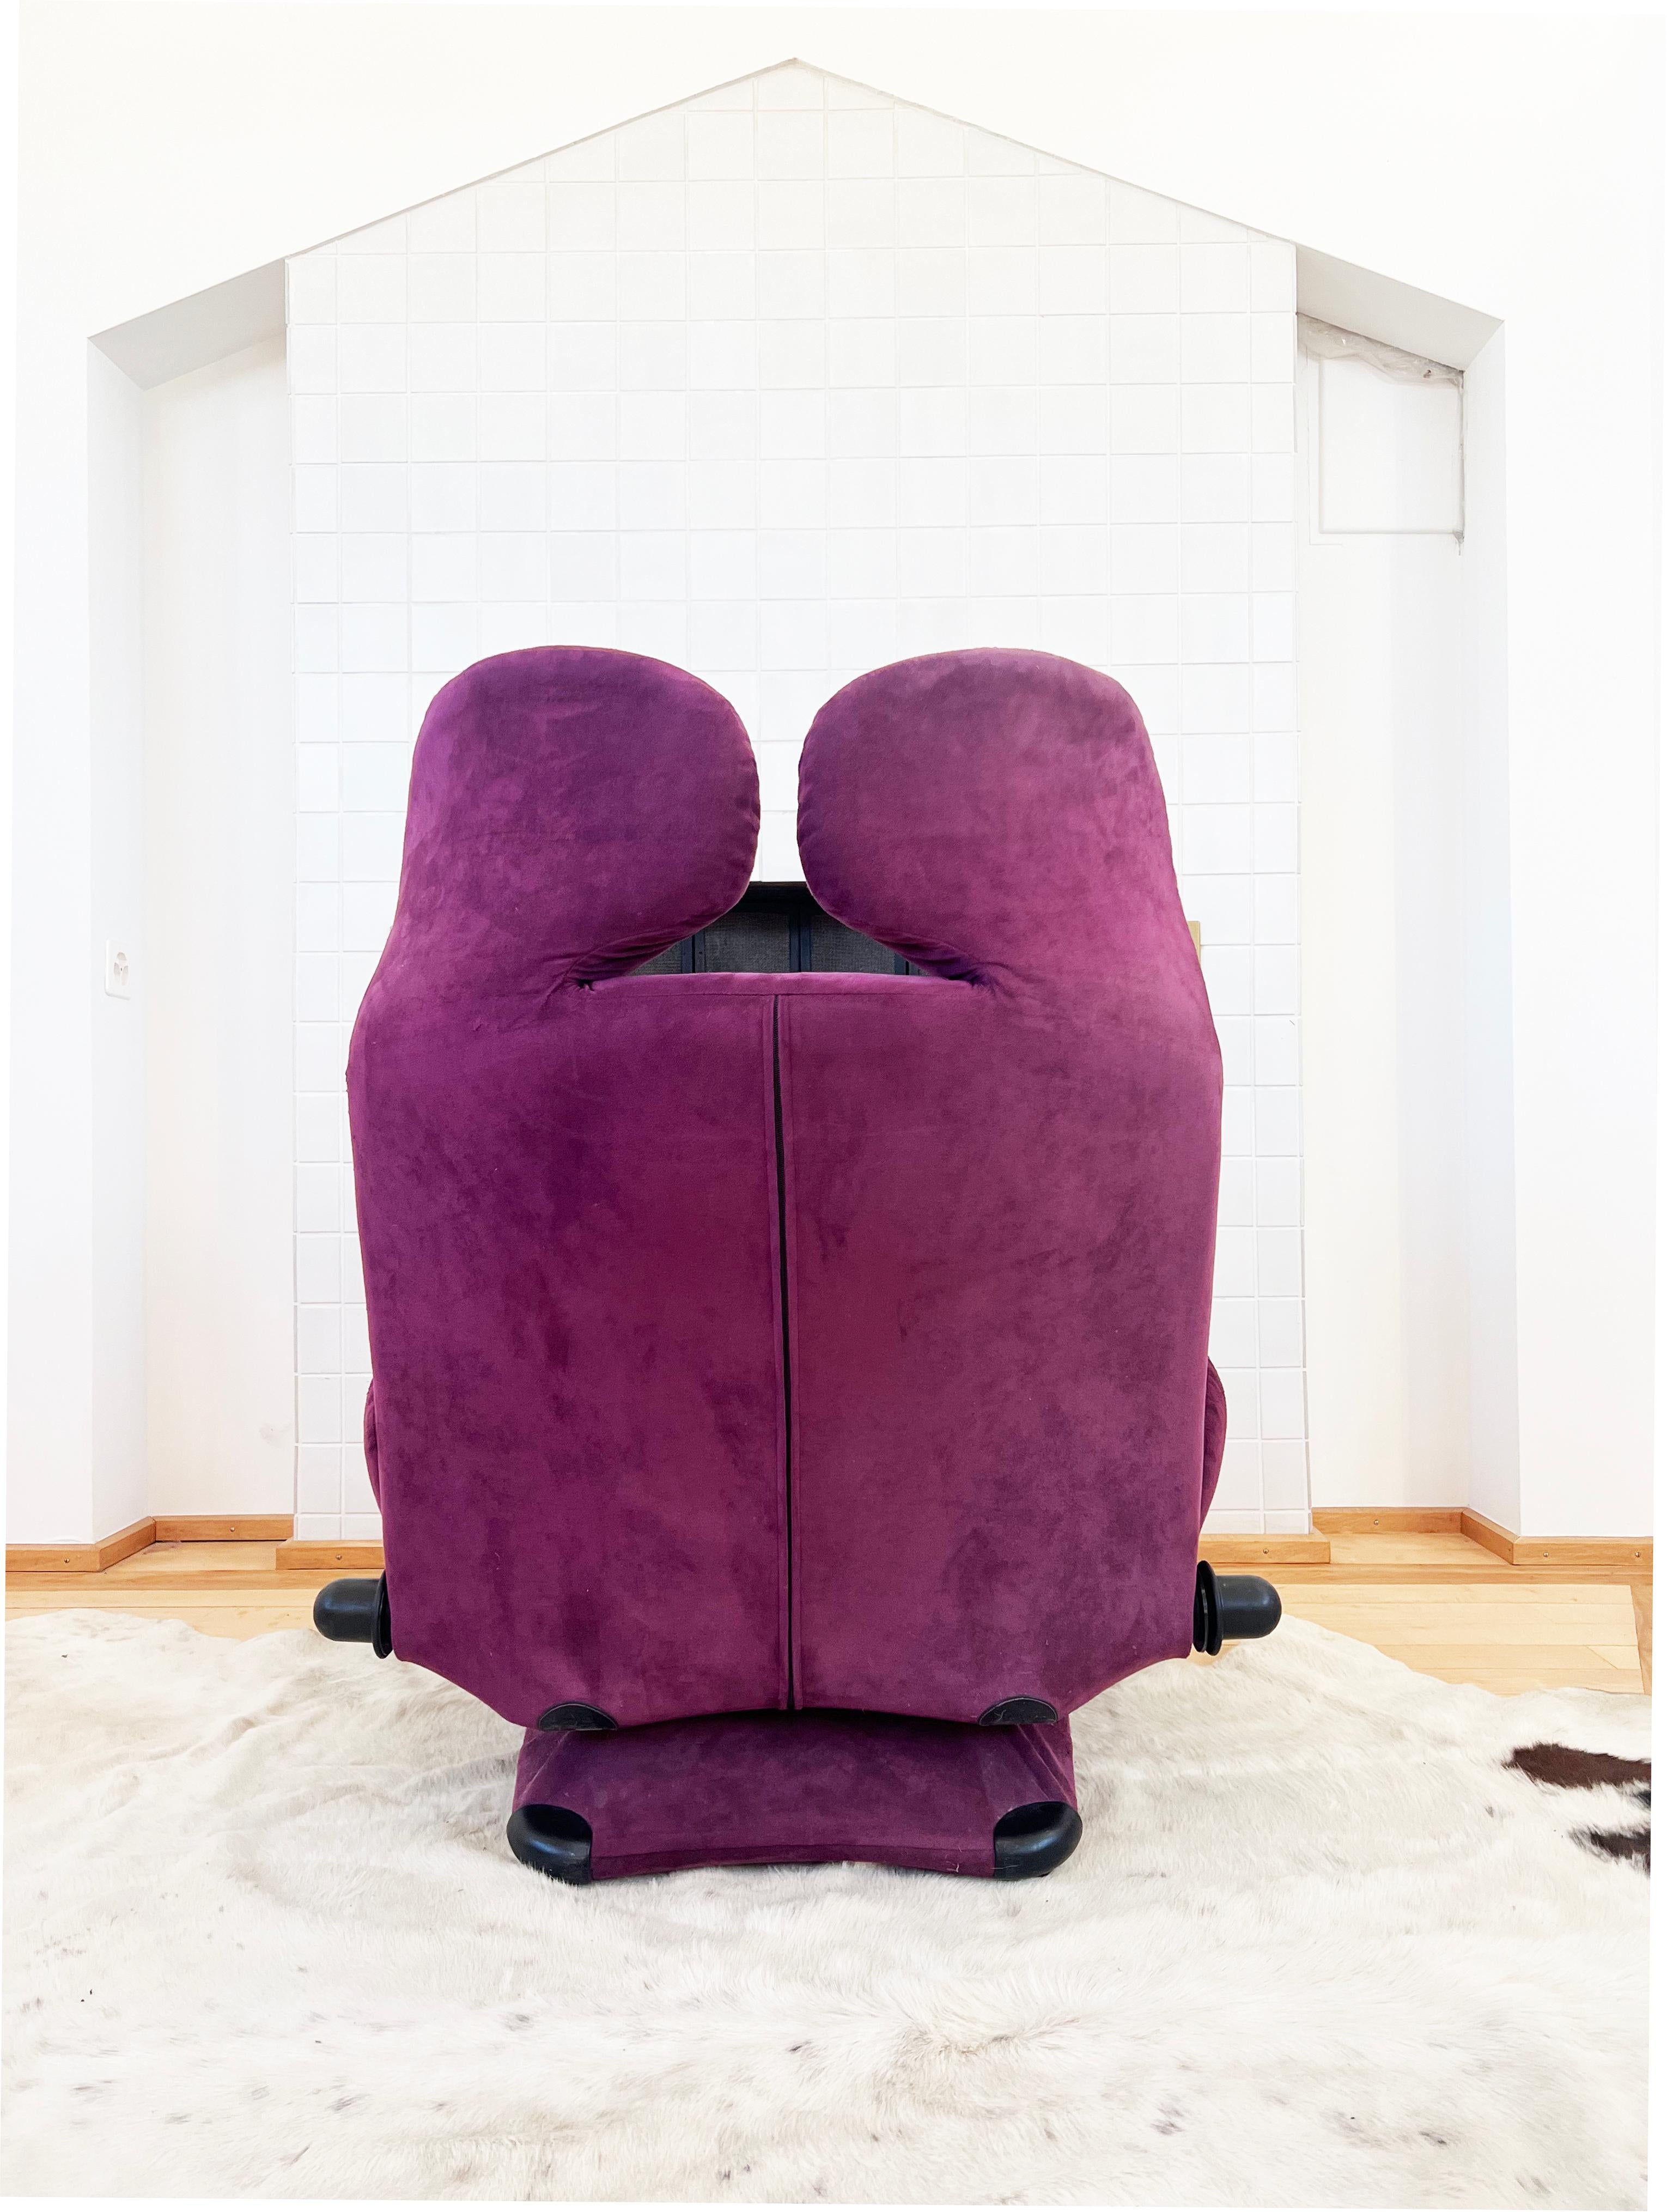 V.Cool Purple Suede Cassina 111 Wink Chaise Lounge by Toshiyuki Kita Japan Italy For Sale 4